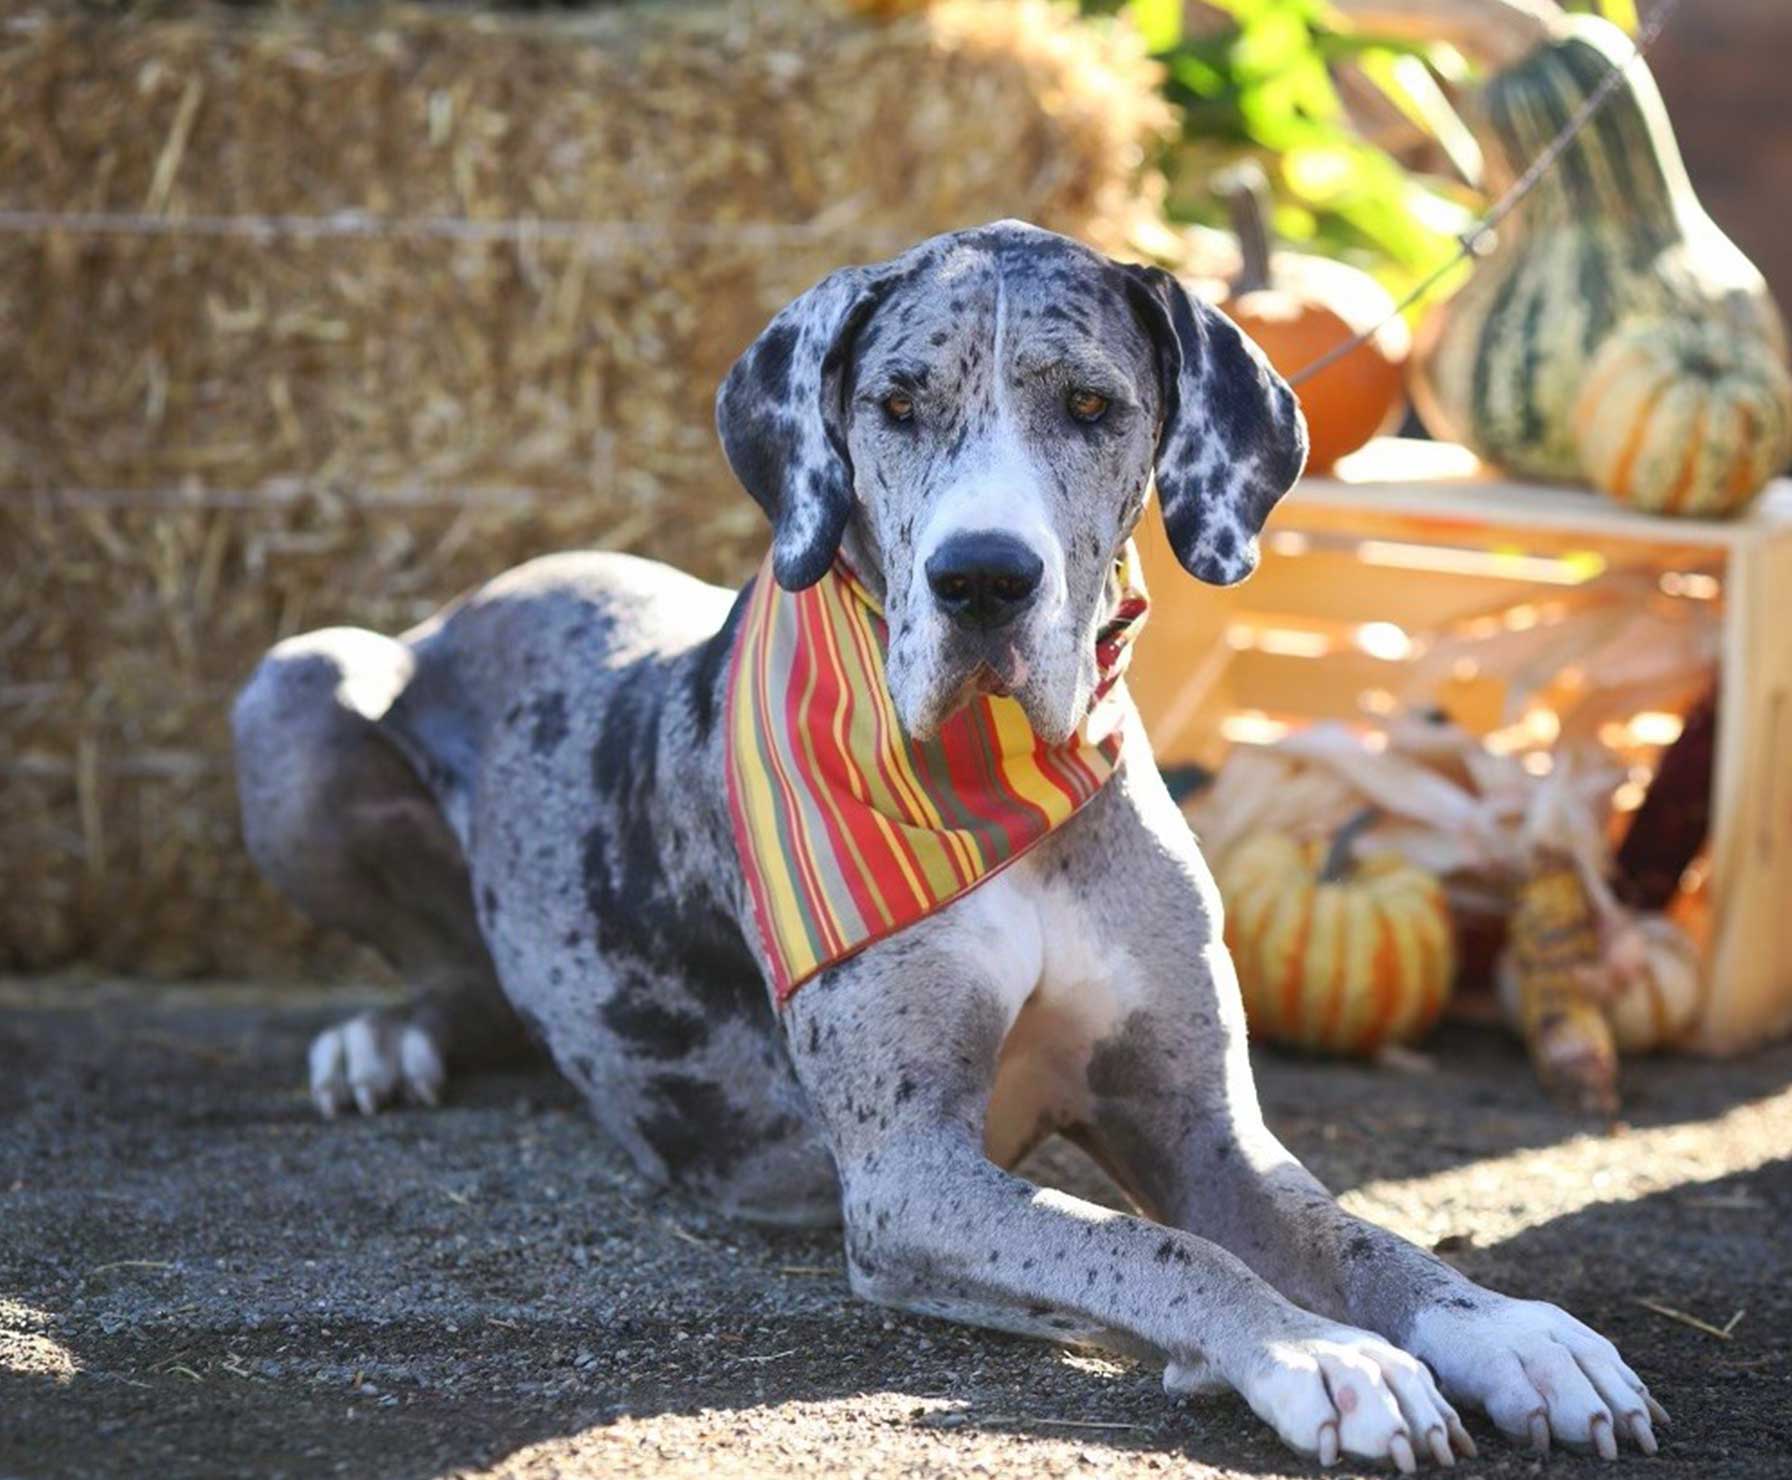 Pebbles the Dane lying down in front of pumpkins and hay wearing a bandana in fall colors